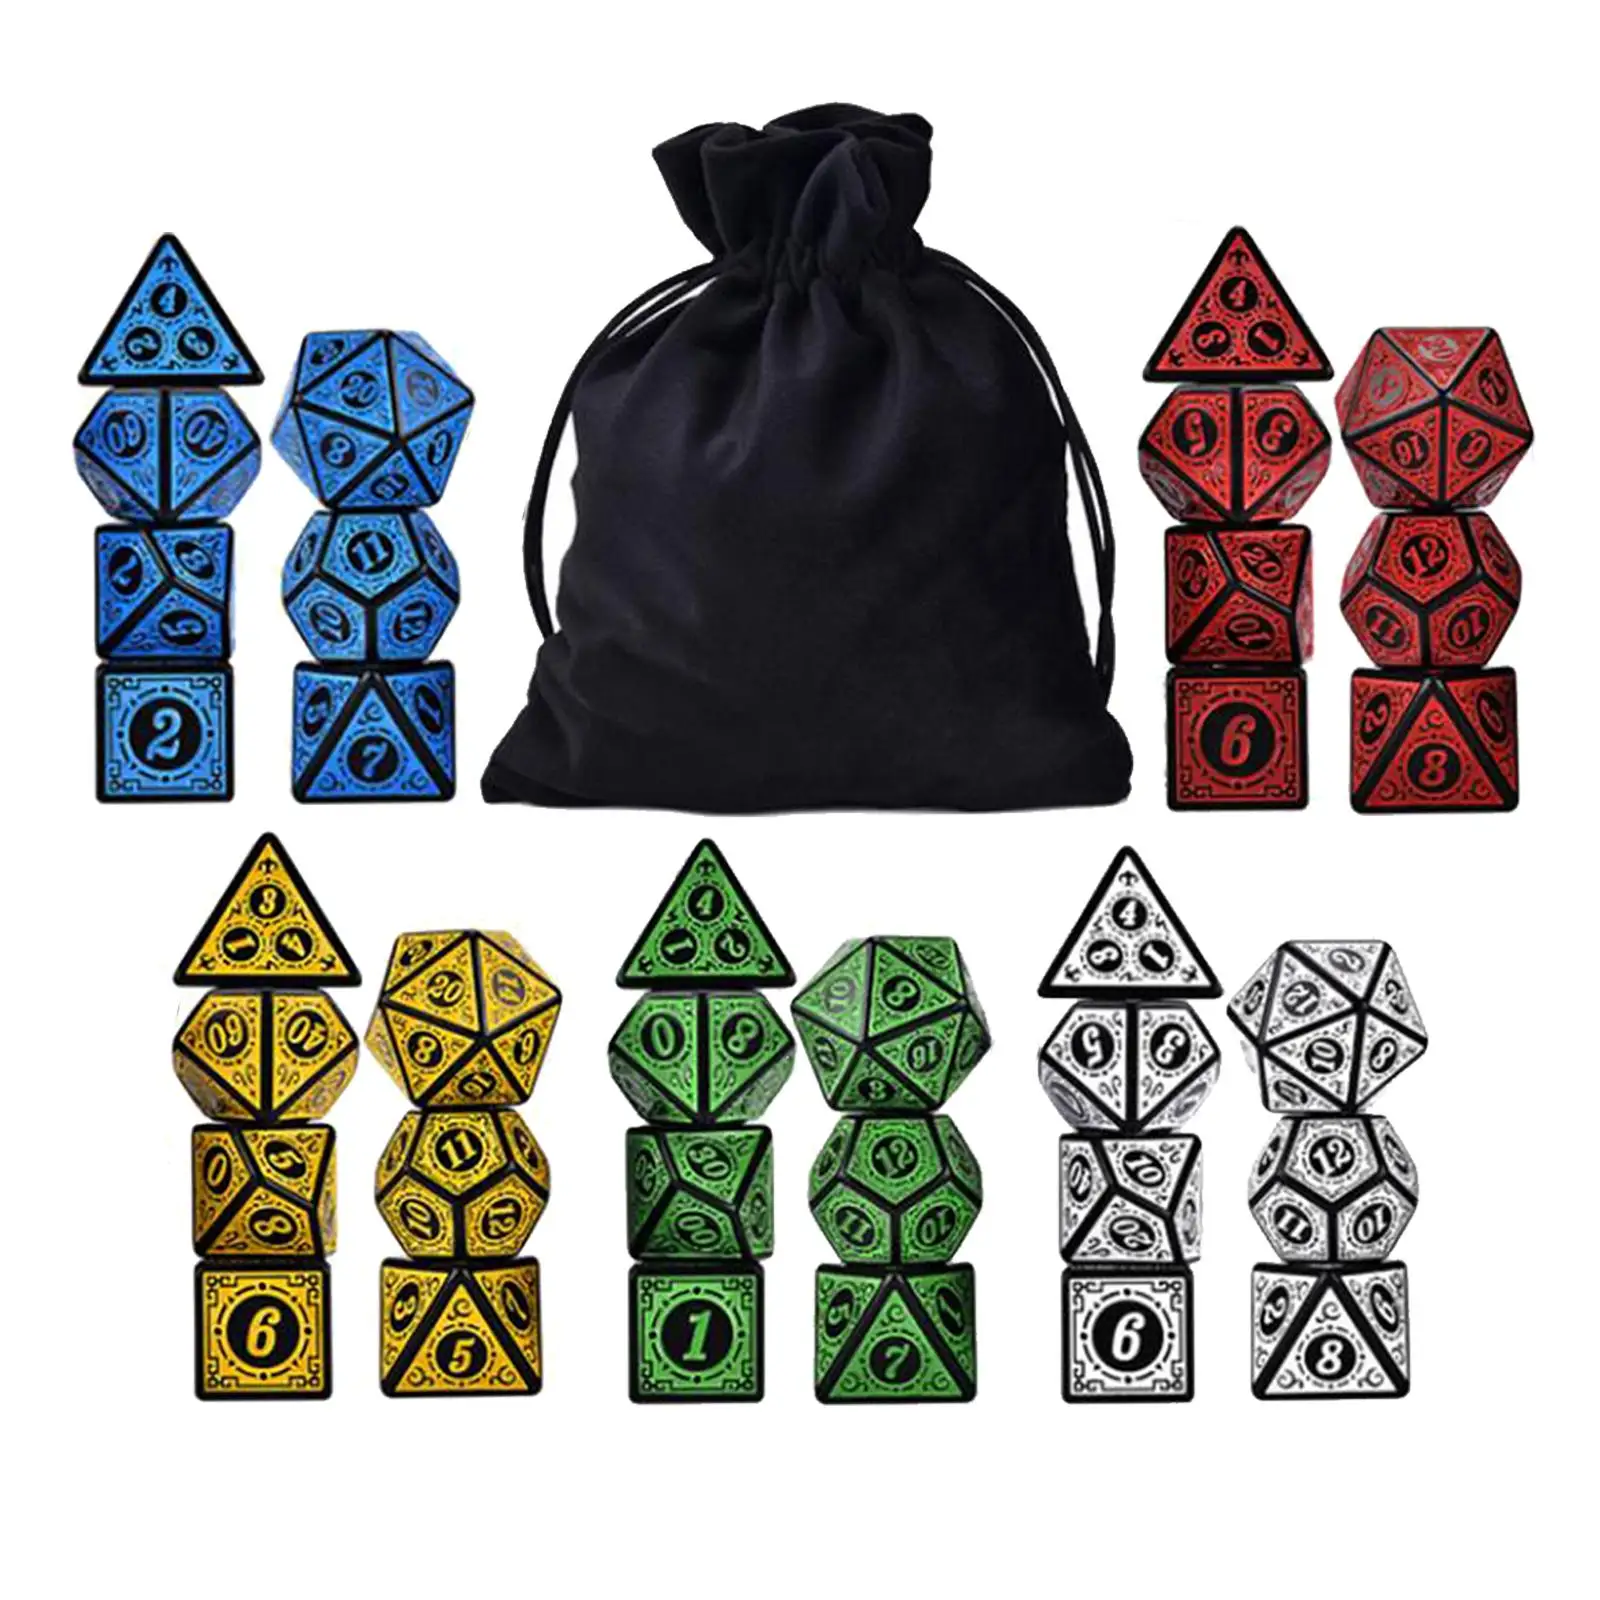 35 Pieces Polyhedral Dice Set for Table Games Math Teaching Role Playing